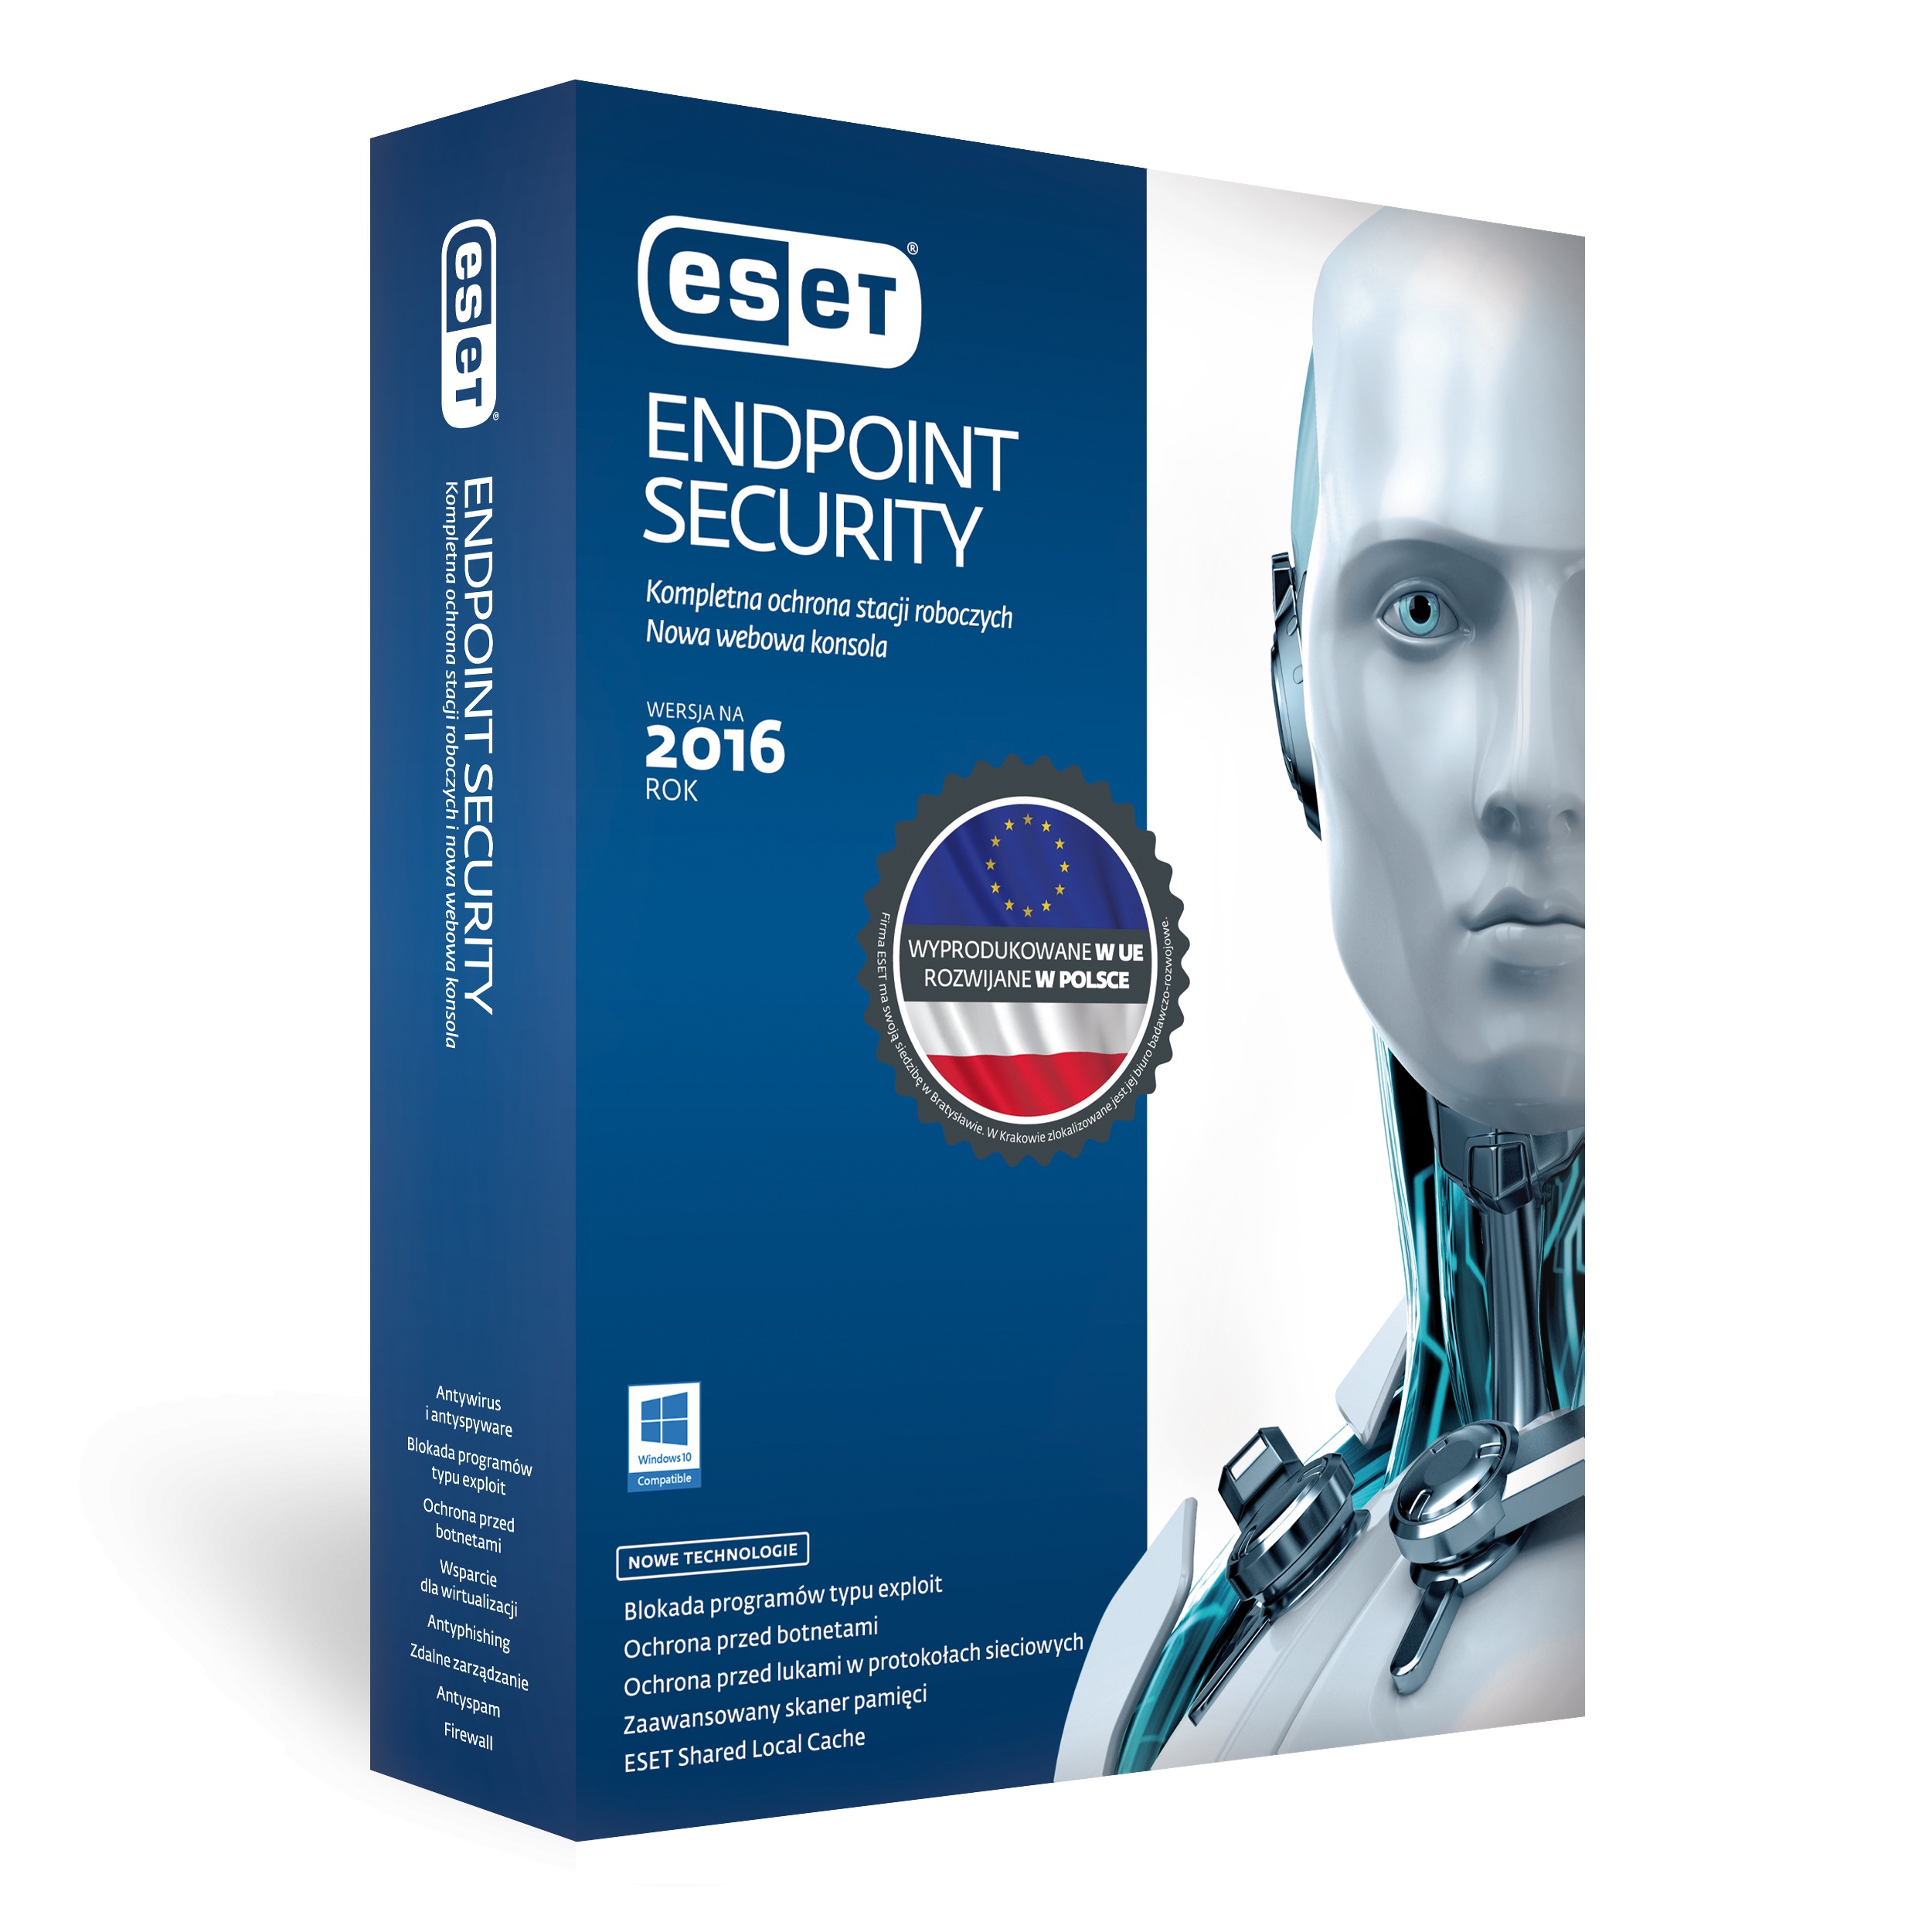 ESET Endpoint Security 10.1.2046.0 for apple instal free